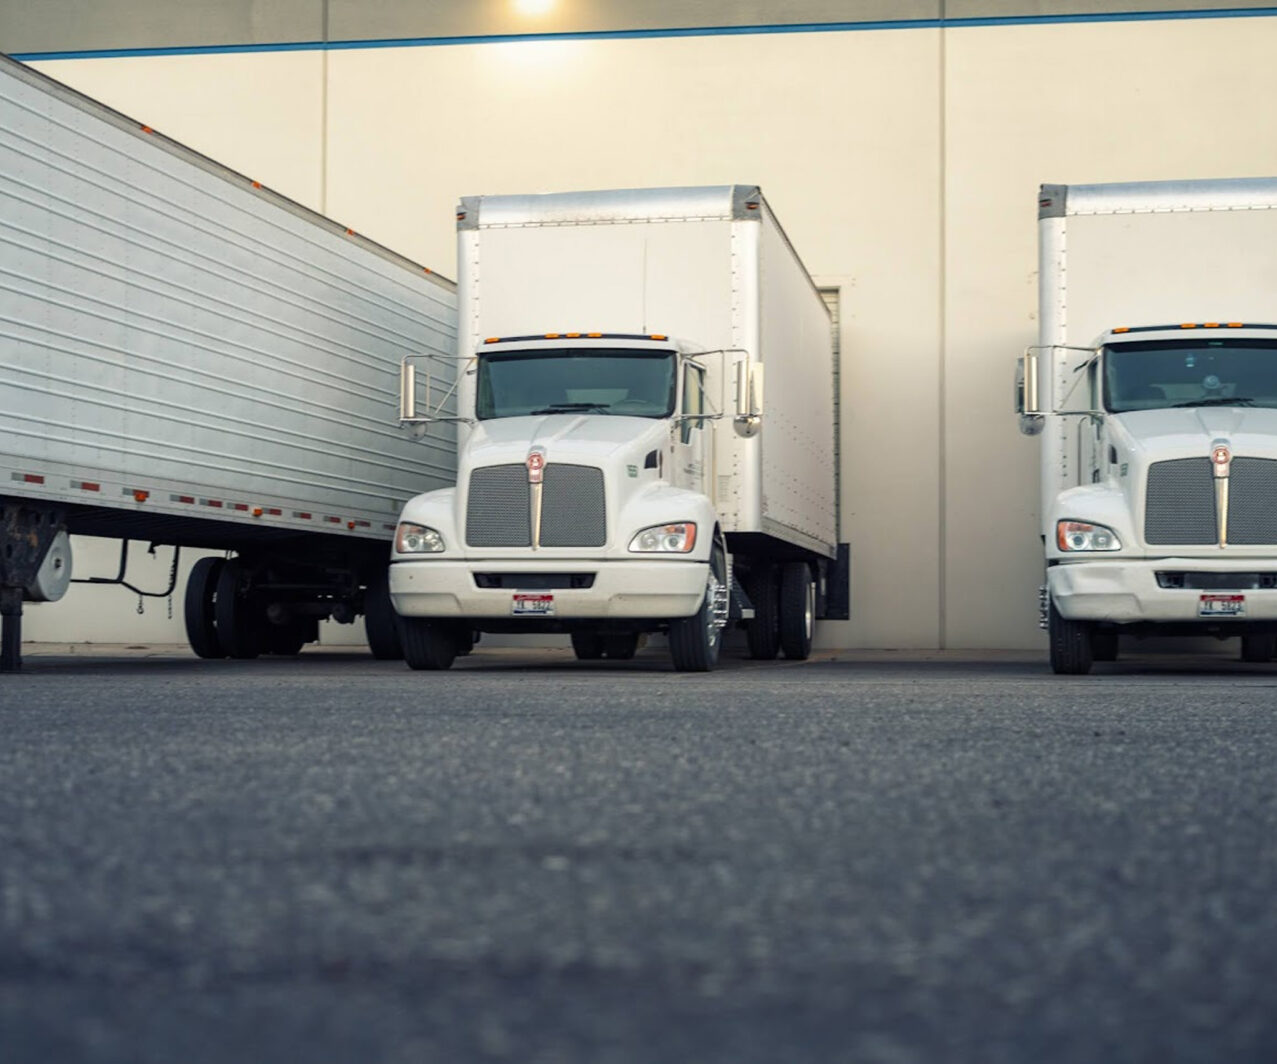 Two white freight trucks with trailers parked at a warehouse